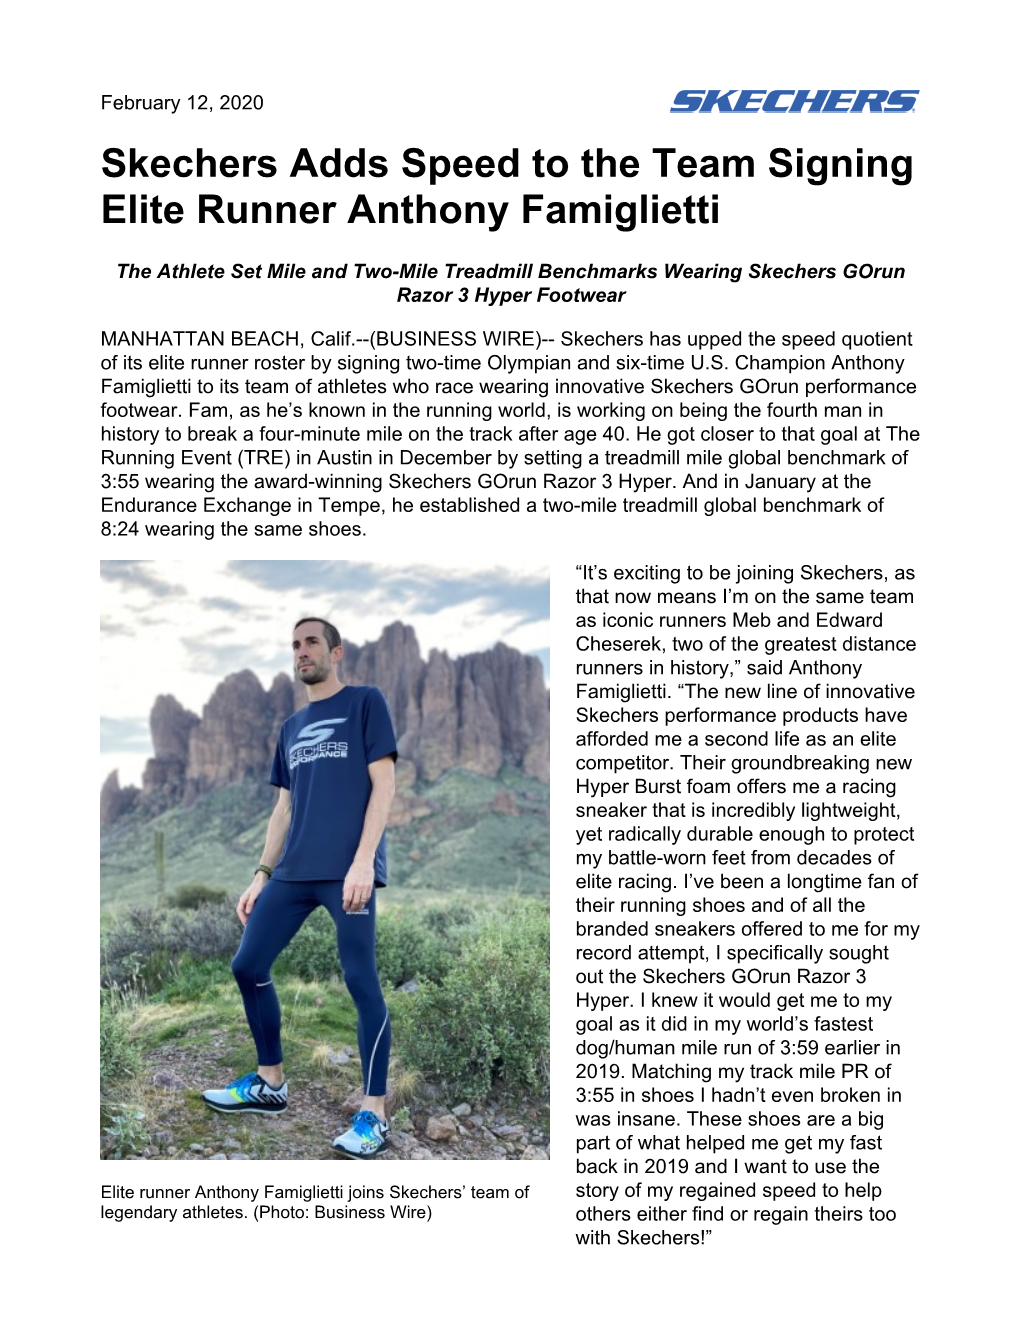 Skechers Adds Speed to the Team Signing Elite Runner Anthony Famiglietti